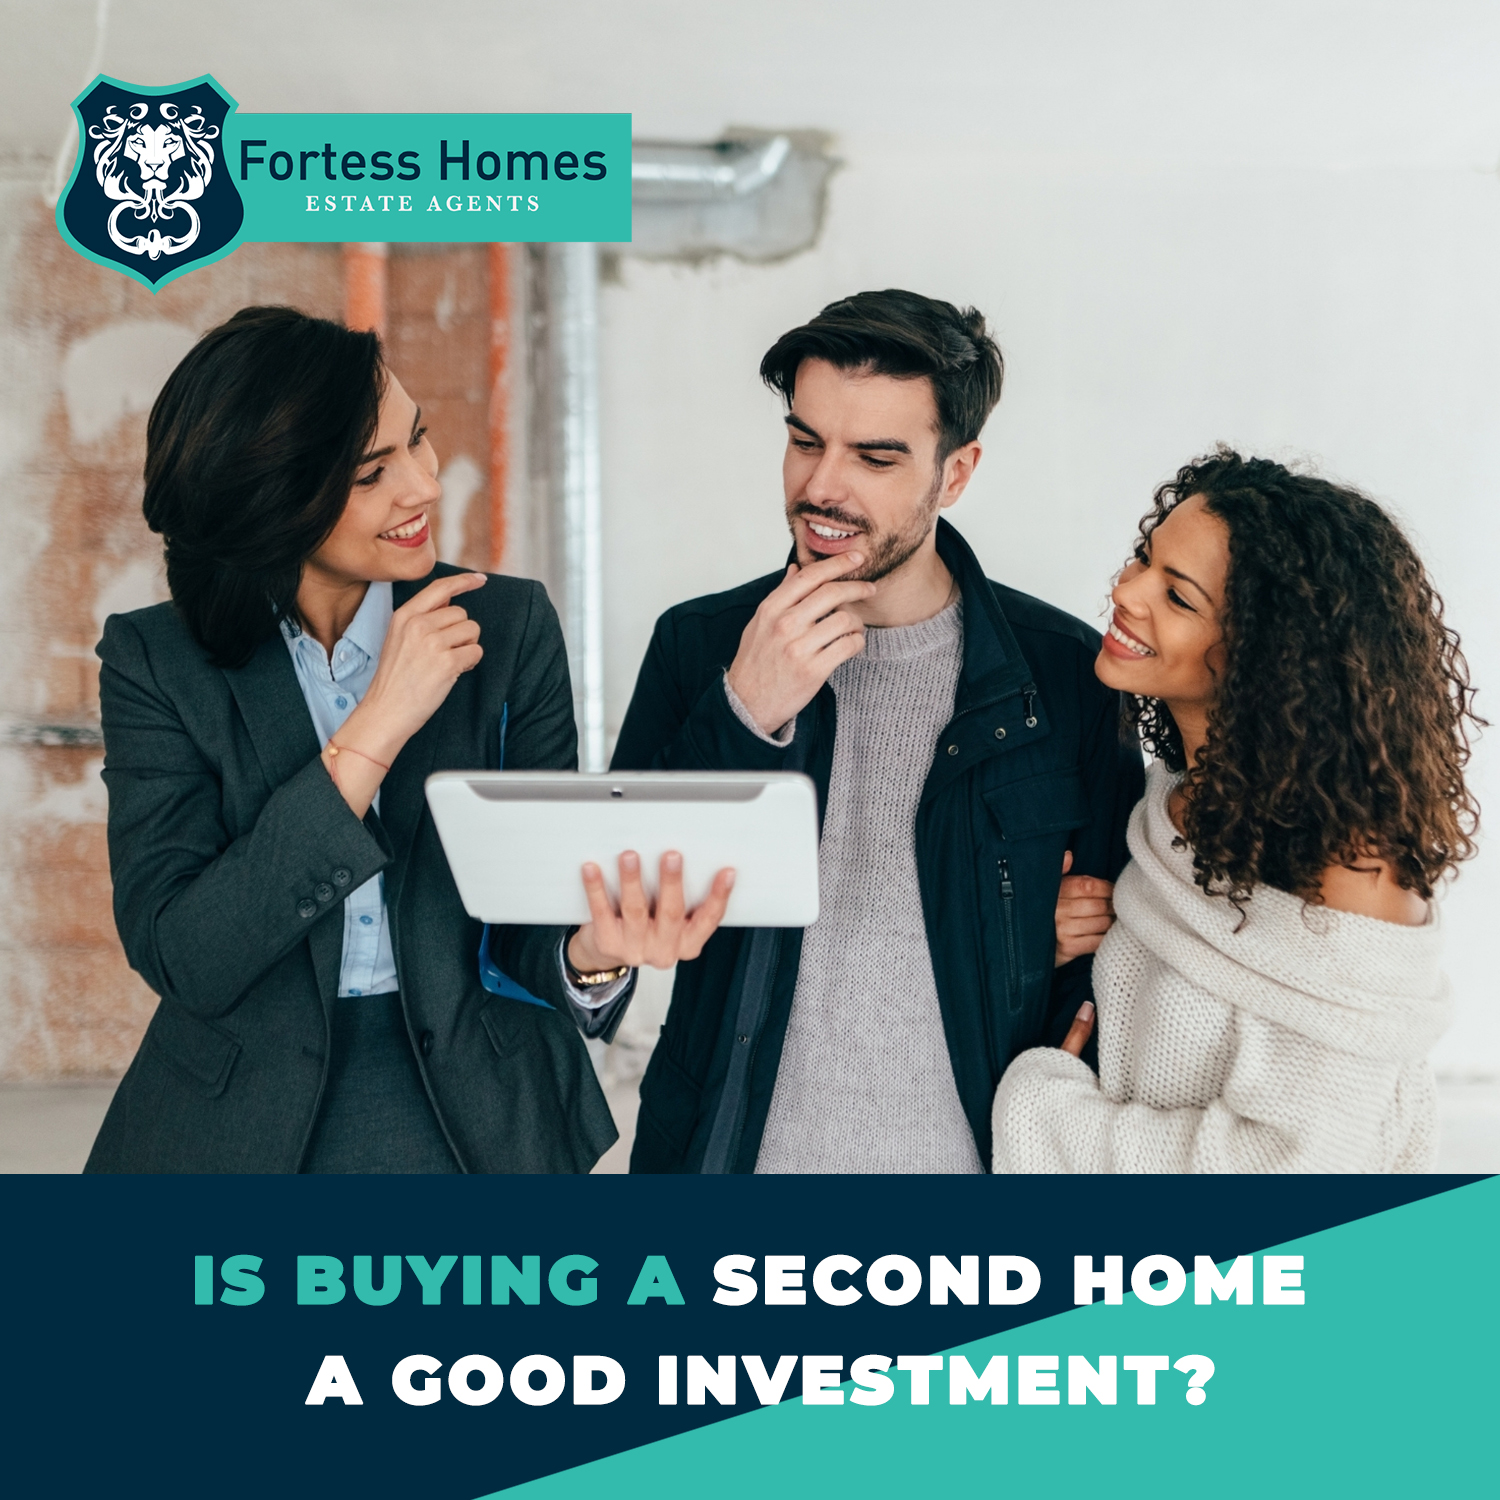 Buying a second home a good investment?